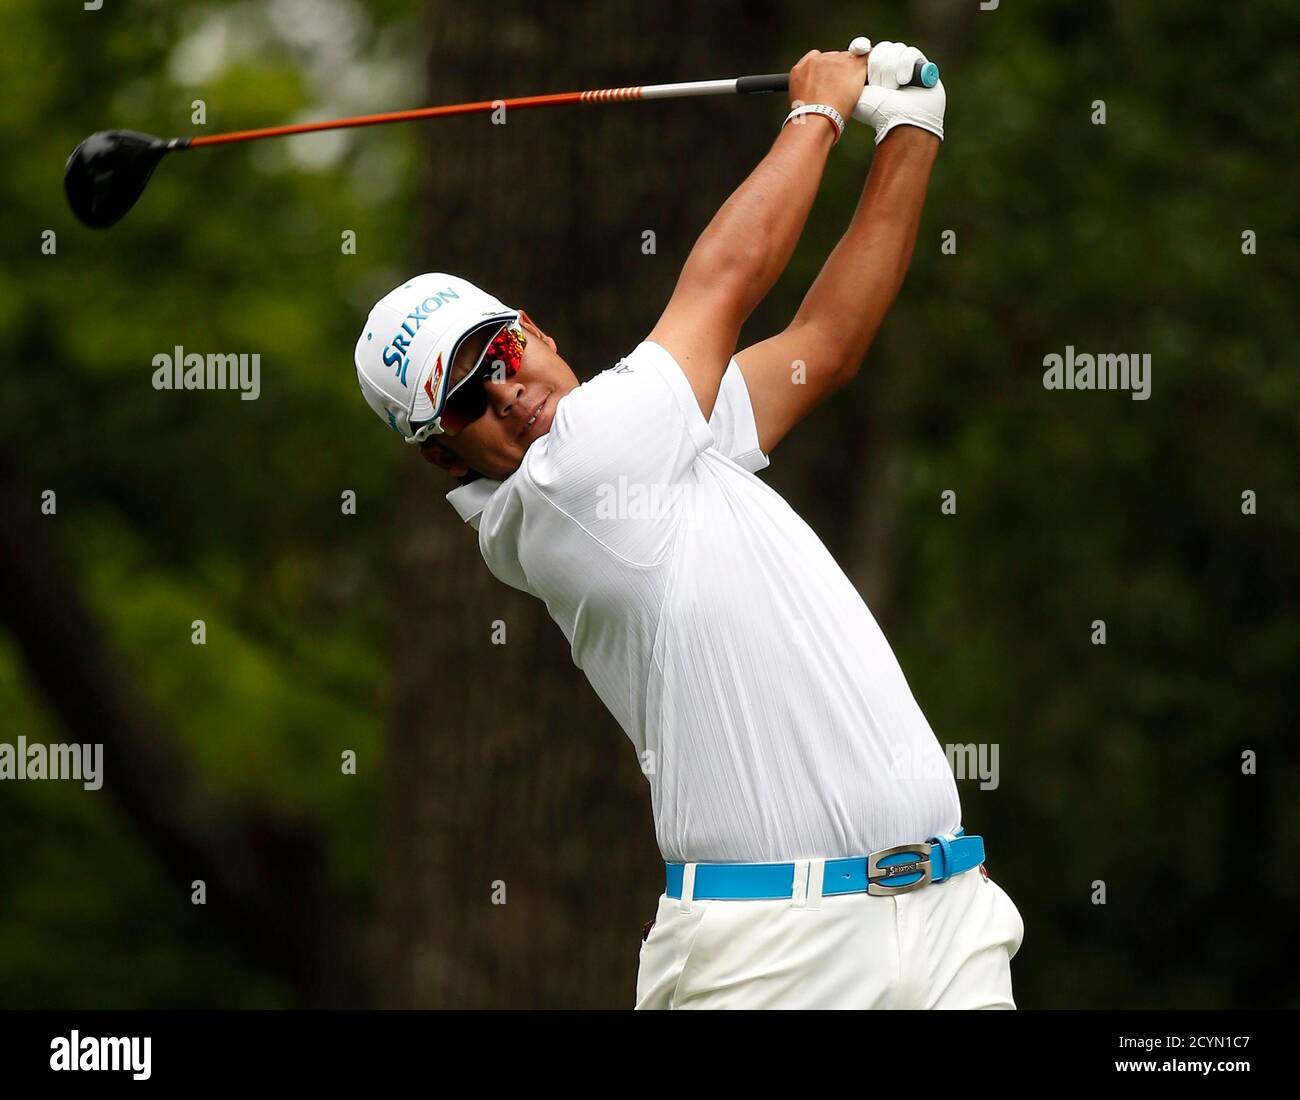 Hideki Matsuyama of Japan hits off the second tee during final round play of the Masters golf tournament at the Augusta National Golf Course in Augusta, Georgia April 12, 2015.   REUTERS/Jim Young Stock Photo